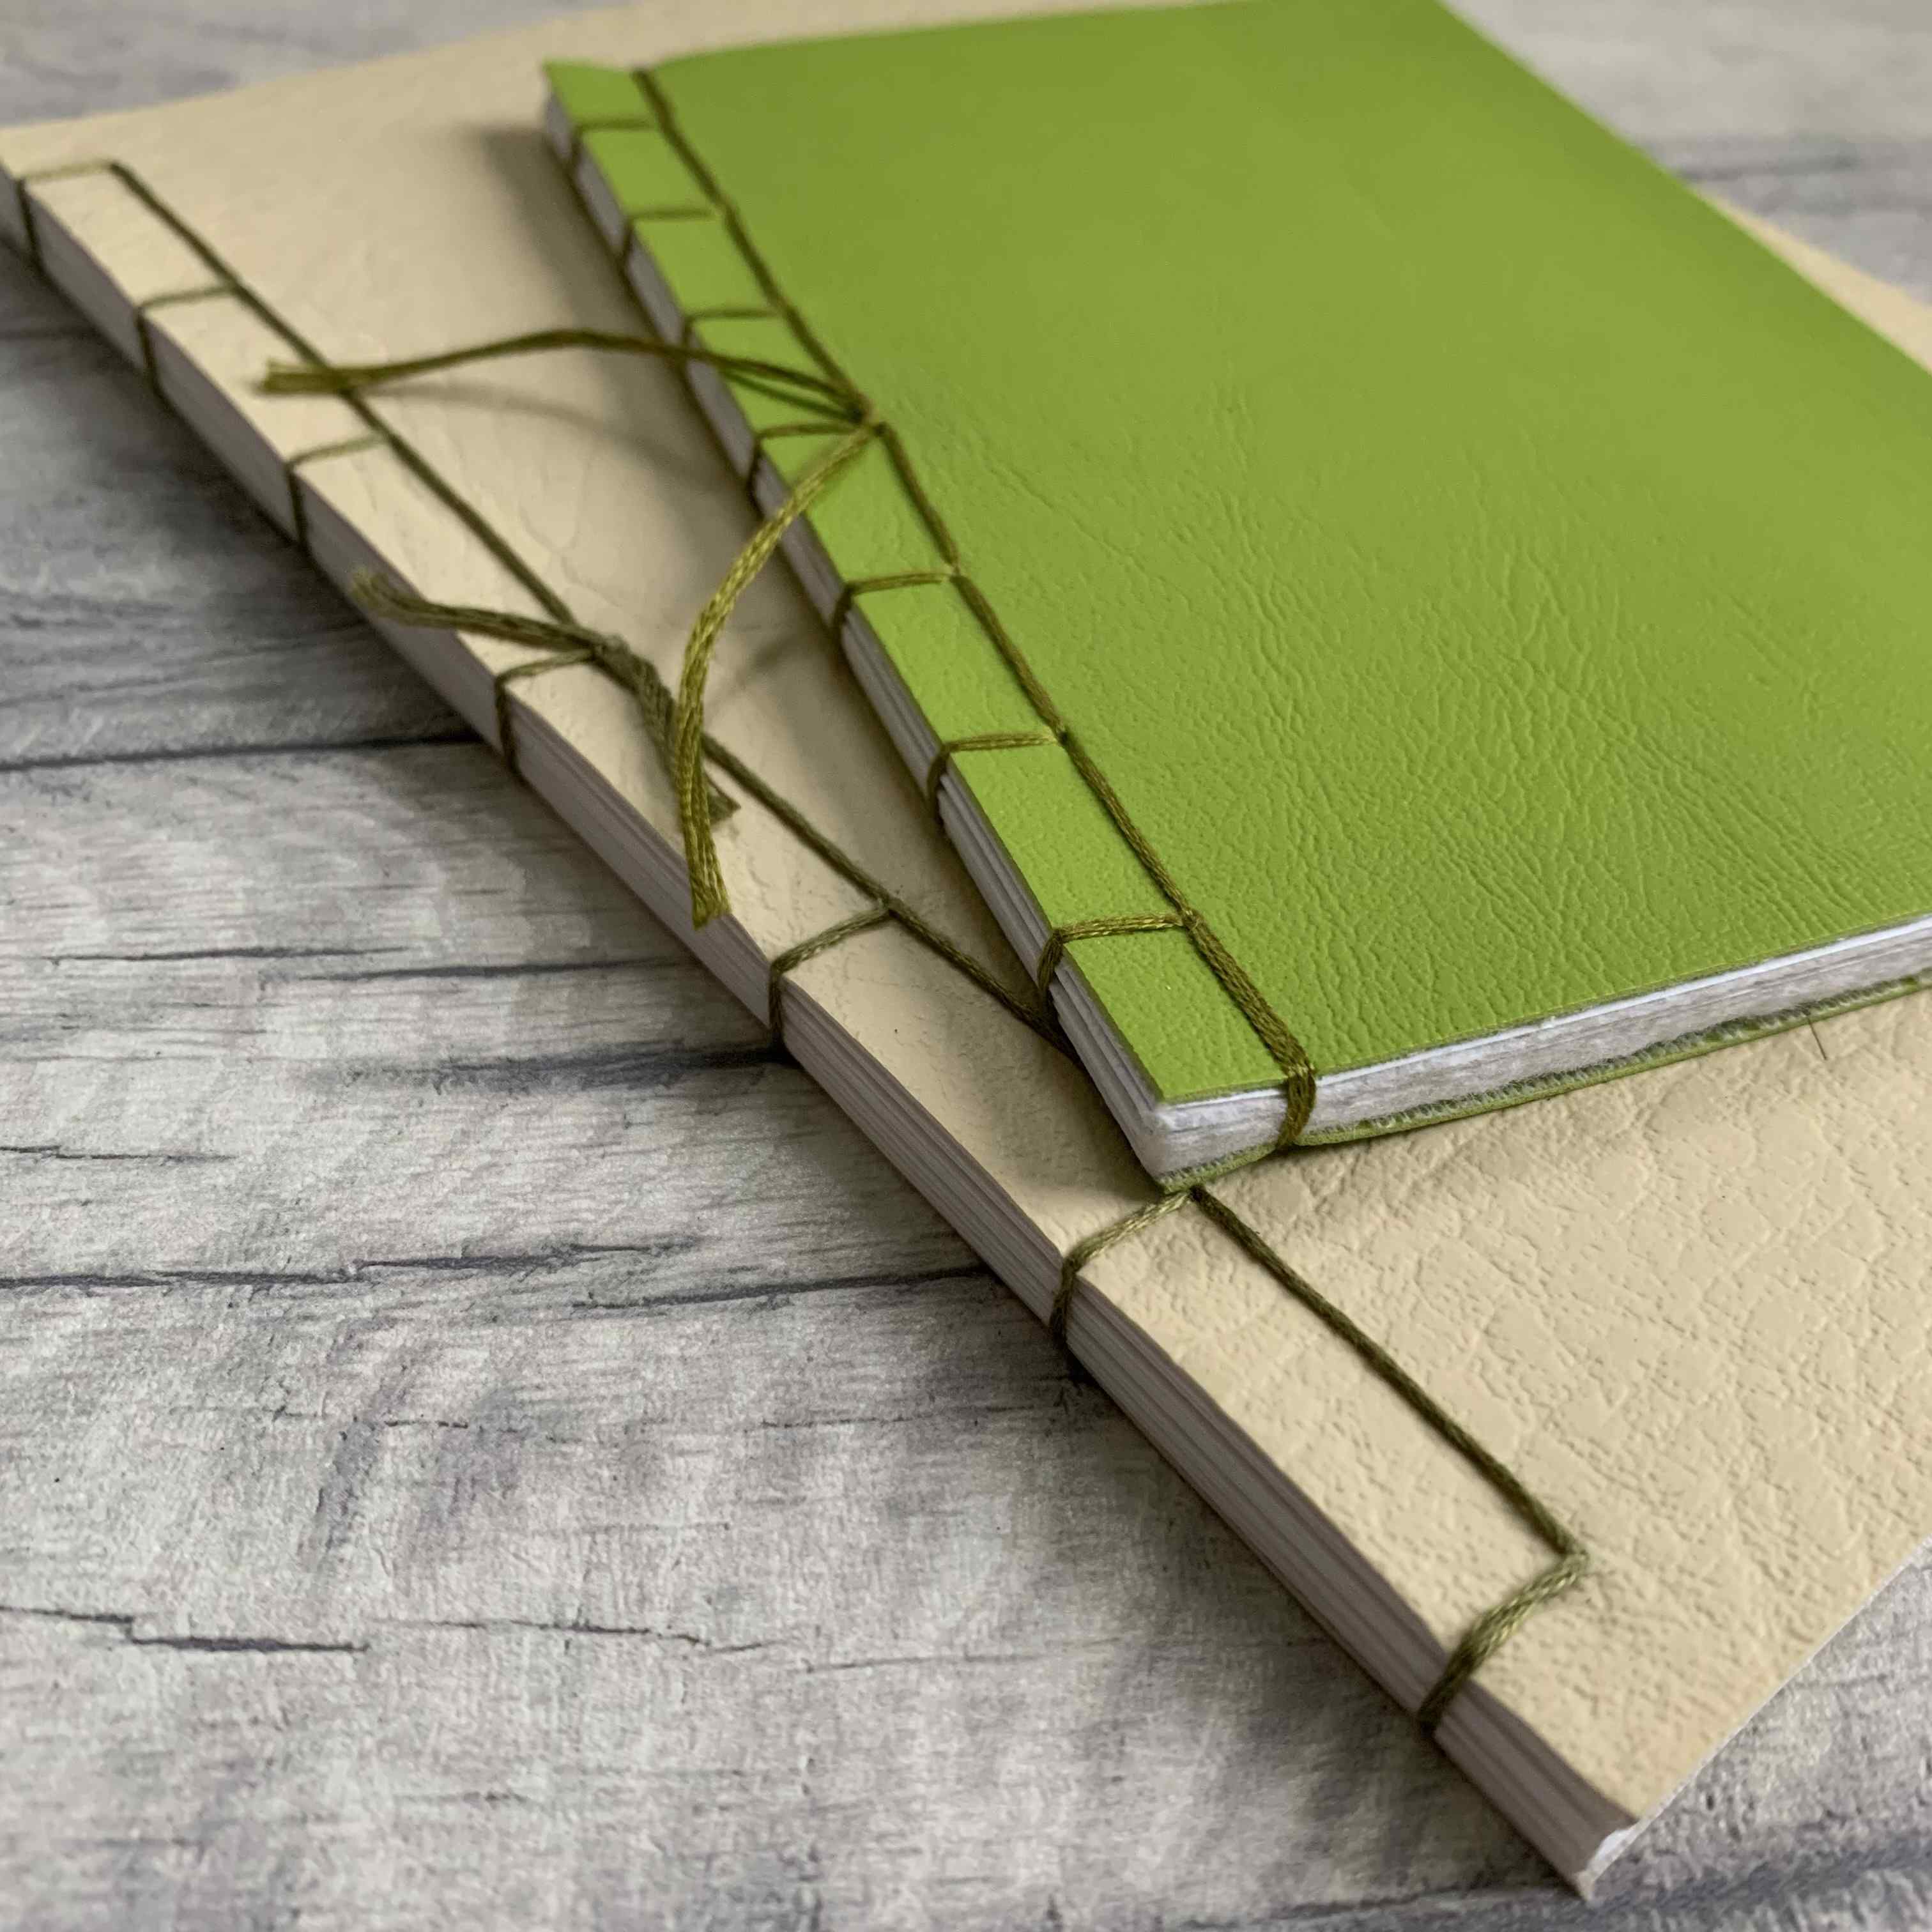 Bookbinding - Make your own Sketchbooks, Journals, Books - 1 Day